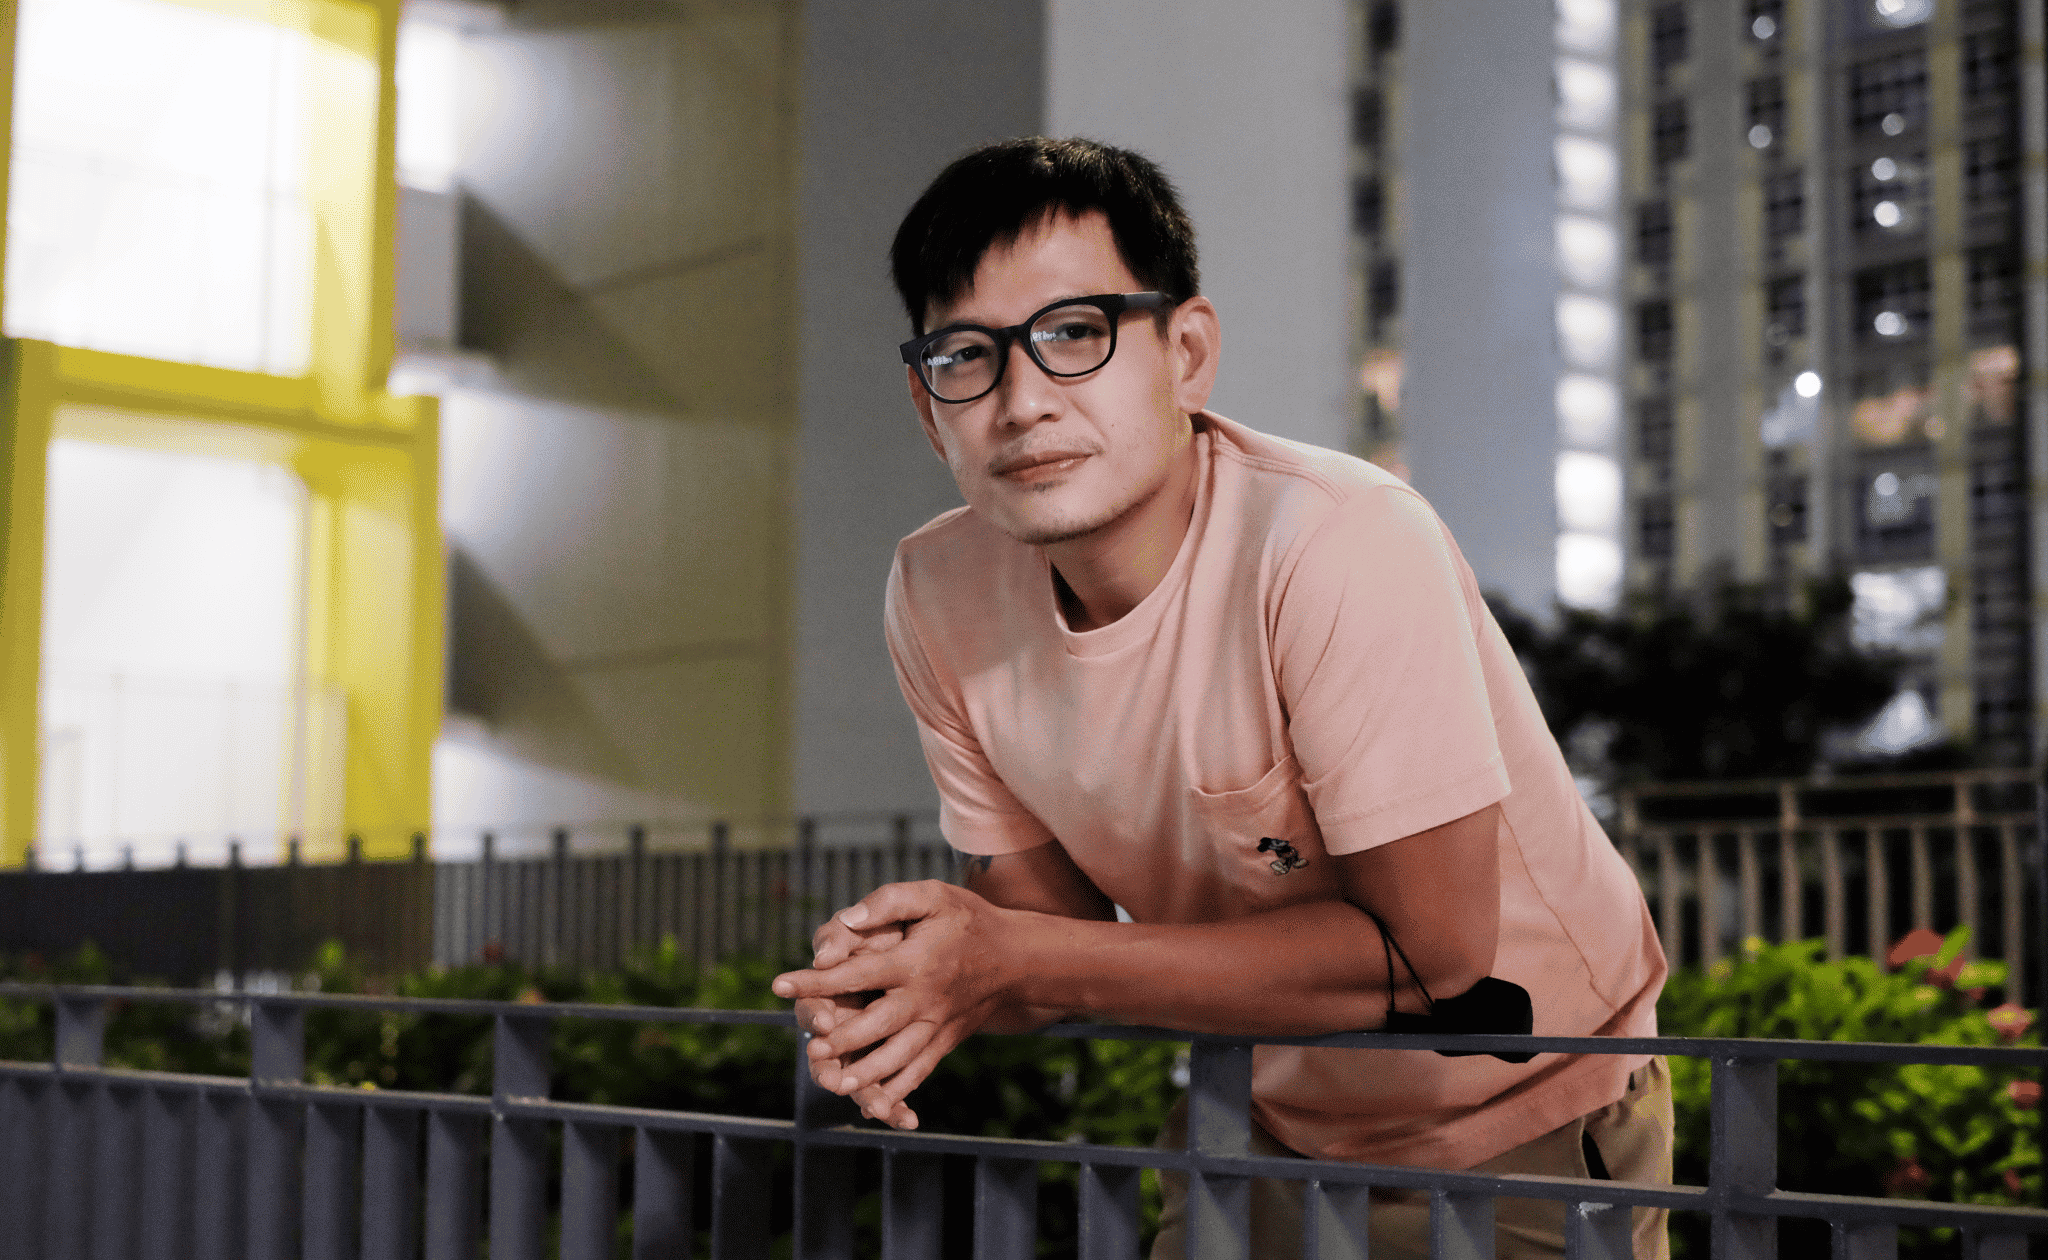 “I don’t believe I can, but …”: CNA prison documentary’s Tian Boon Keng on staying clean